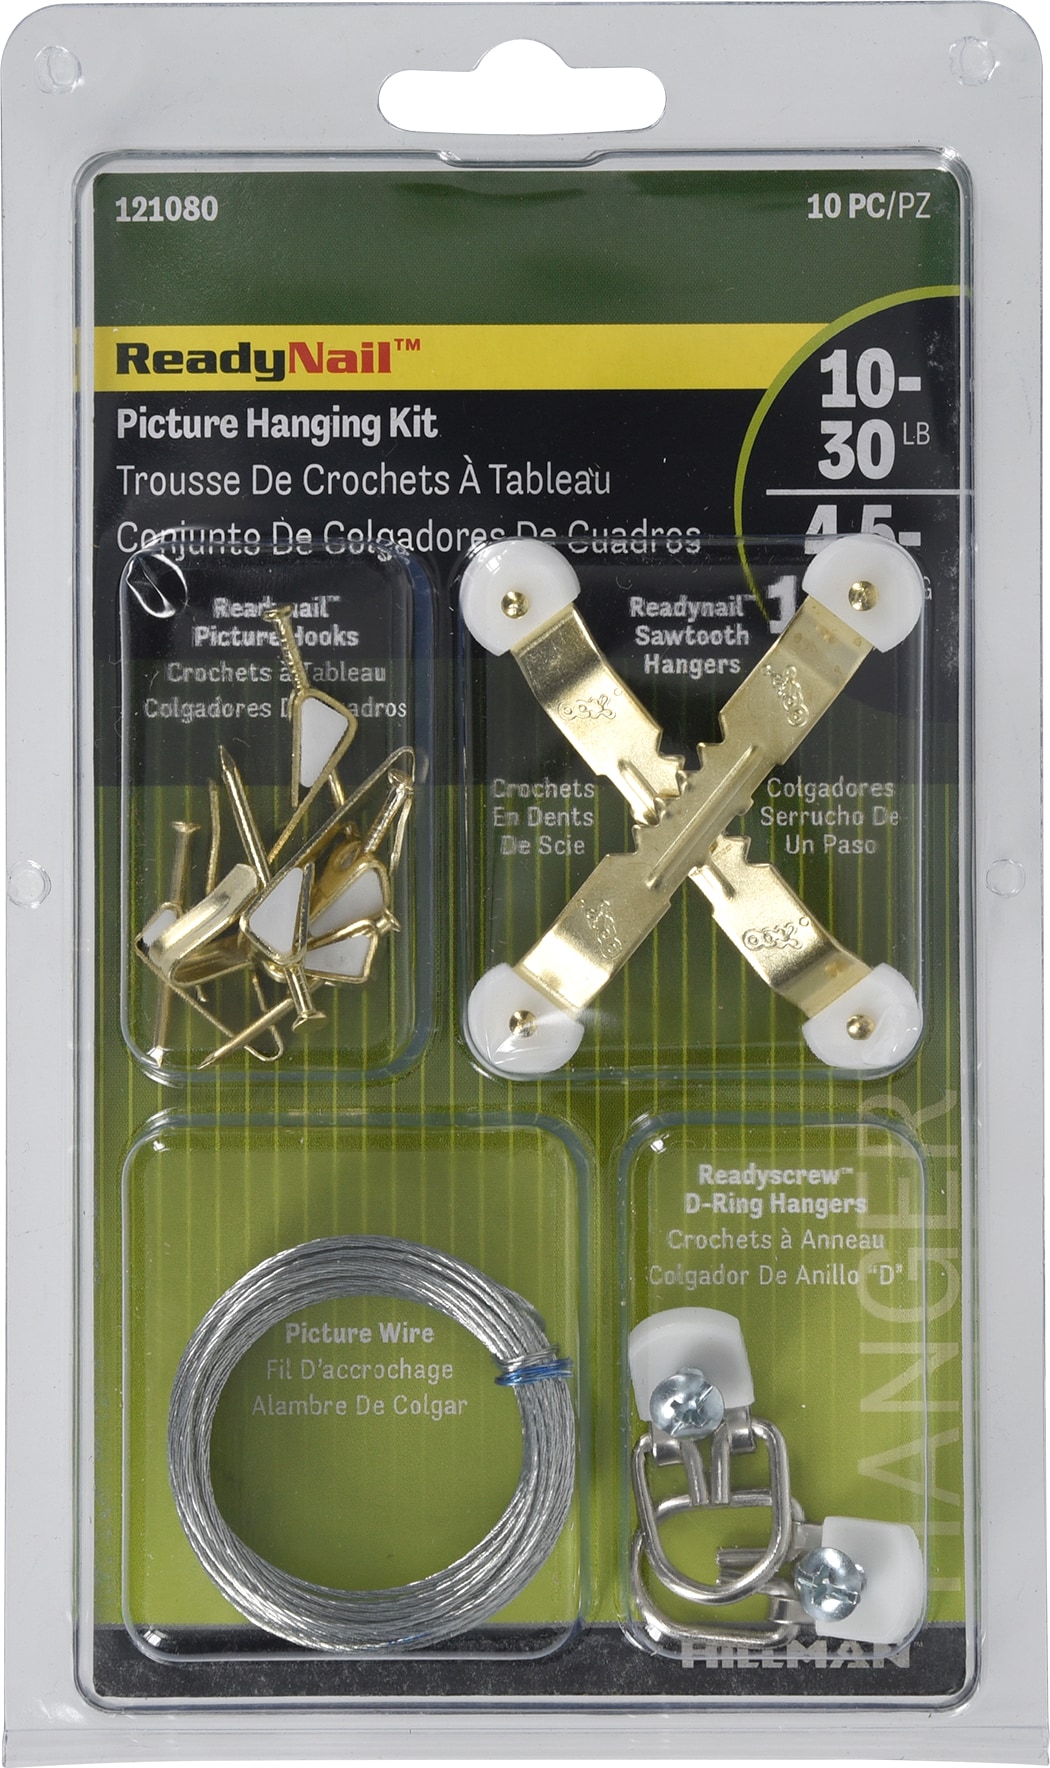 High & Mighty 20lb Picture Hanging Kit